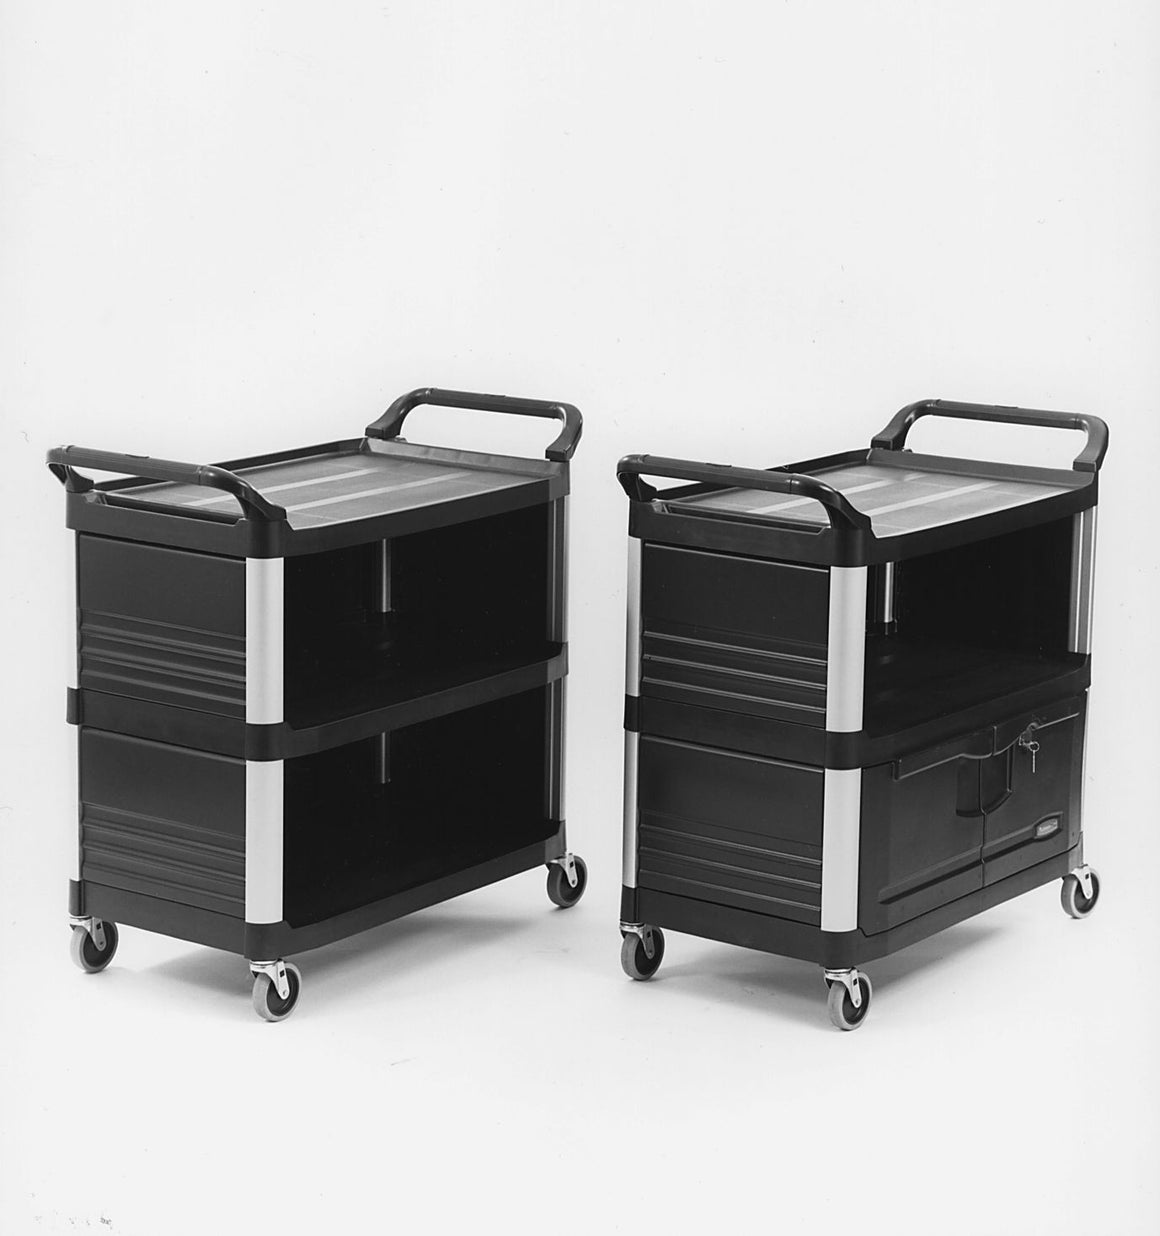 X-tra UTILITY CART ENCLOSED on 3 SIDE BLACK